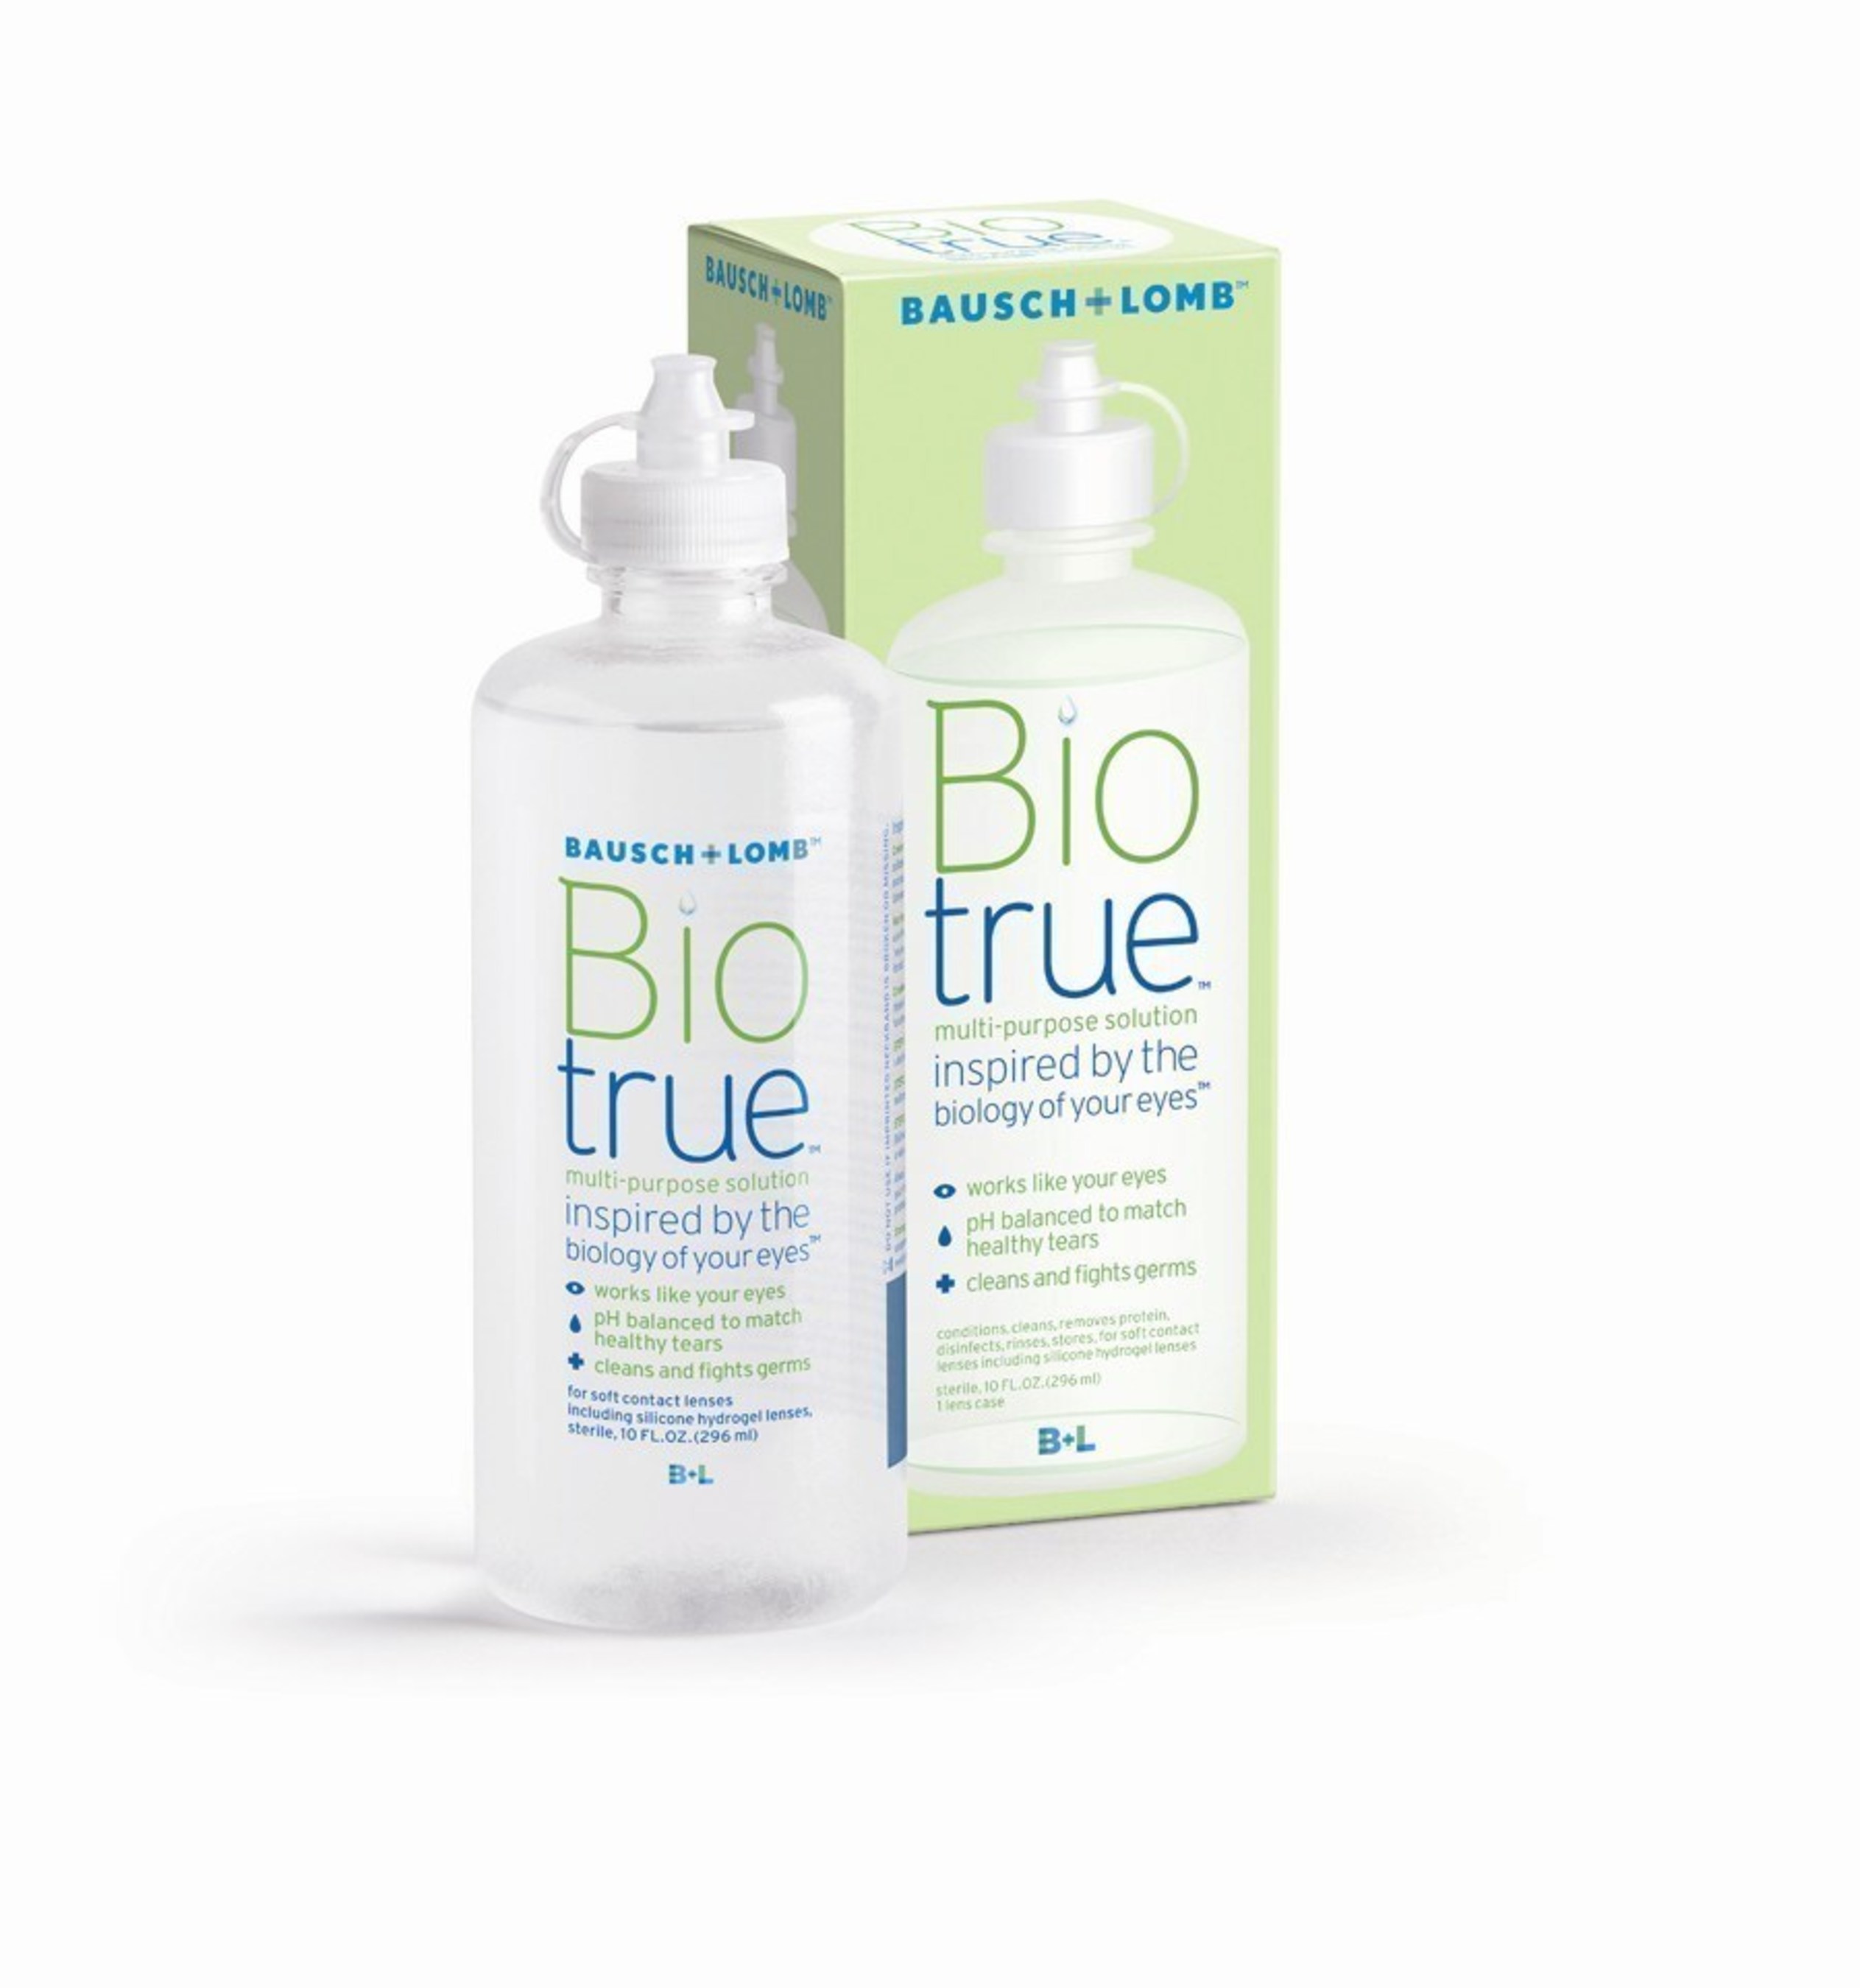 Visit www.biotruechallenge.com to take the Biotrue Challenge and experience the difference. Try it, feel it and love it with a free sample of Biotrue(R) multi-purpose solution!